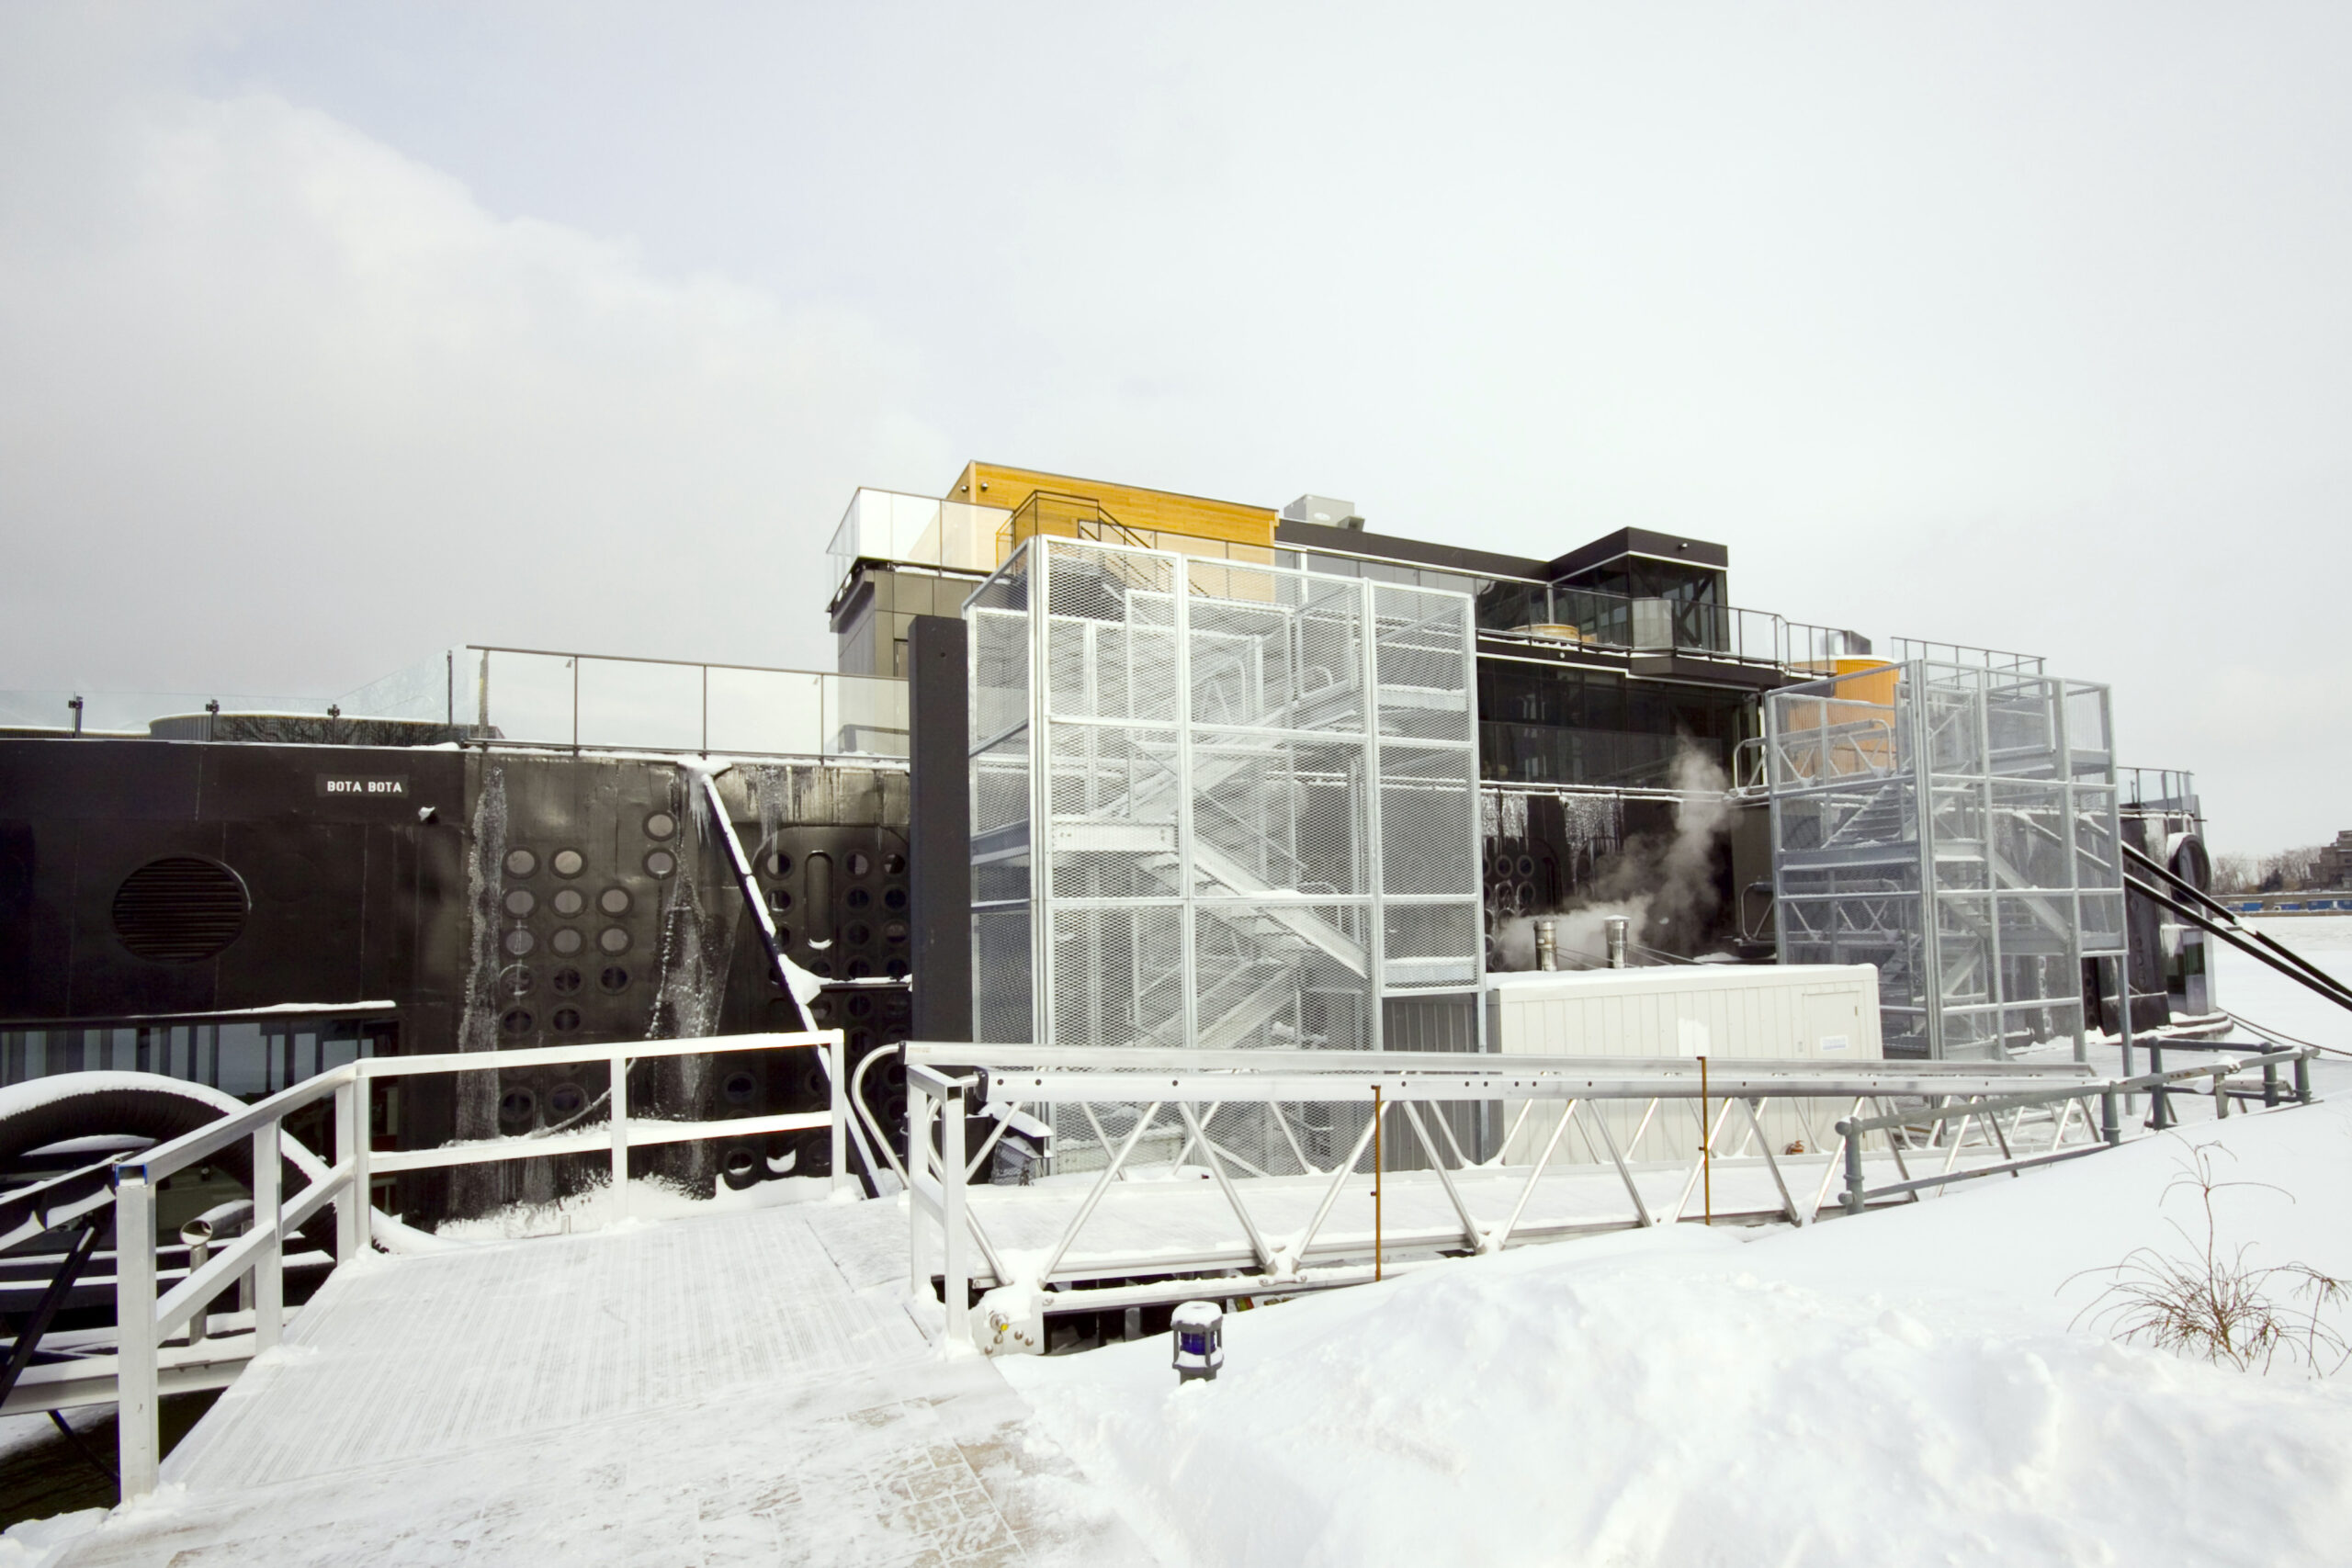 System of aluminum gangway kits and stairs leading to spa boat in winter in Montreal, Canada